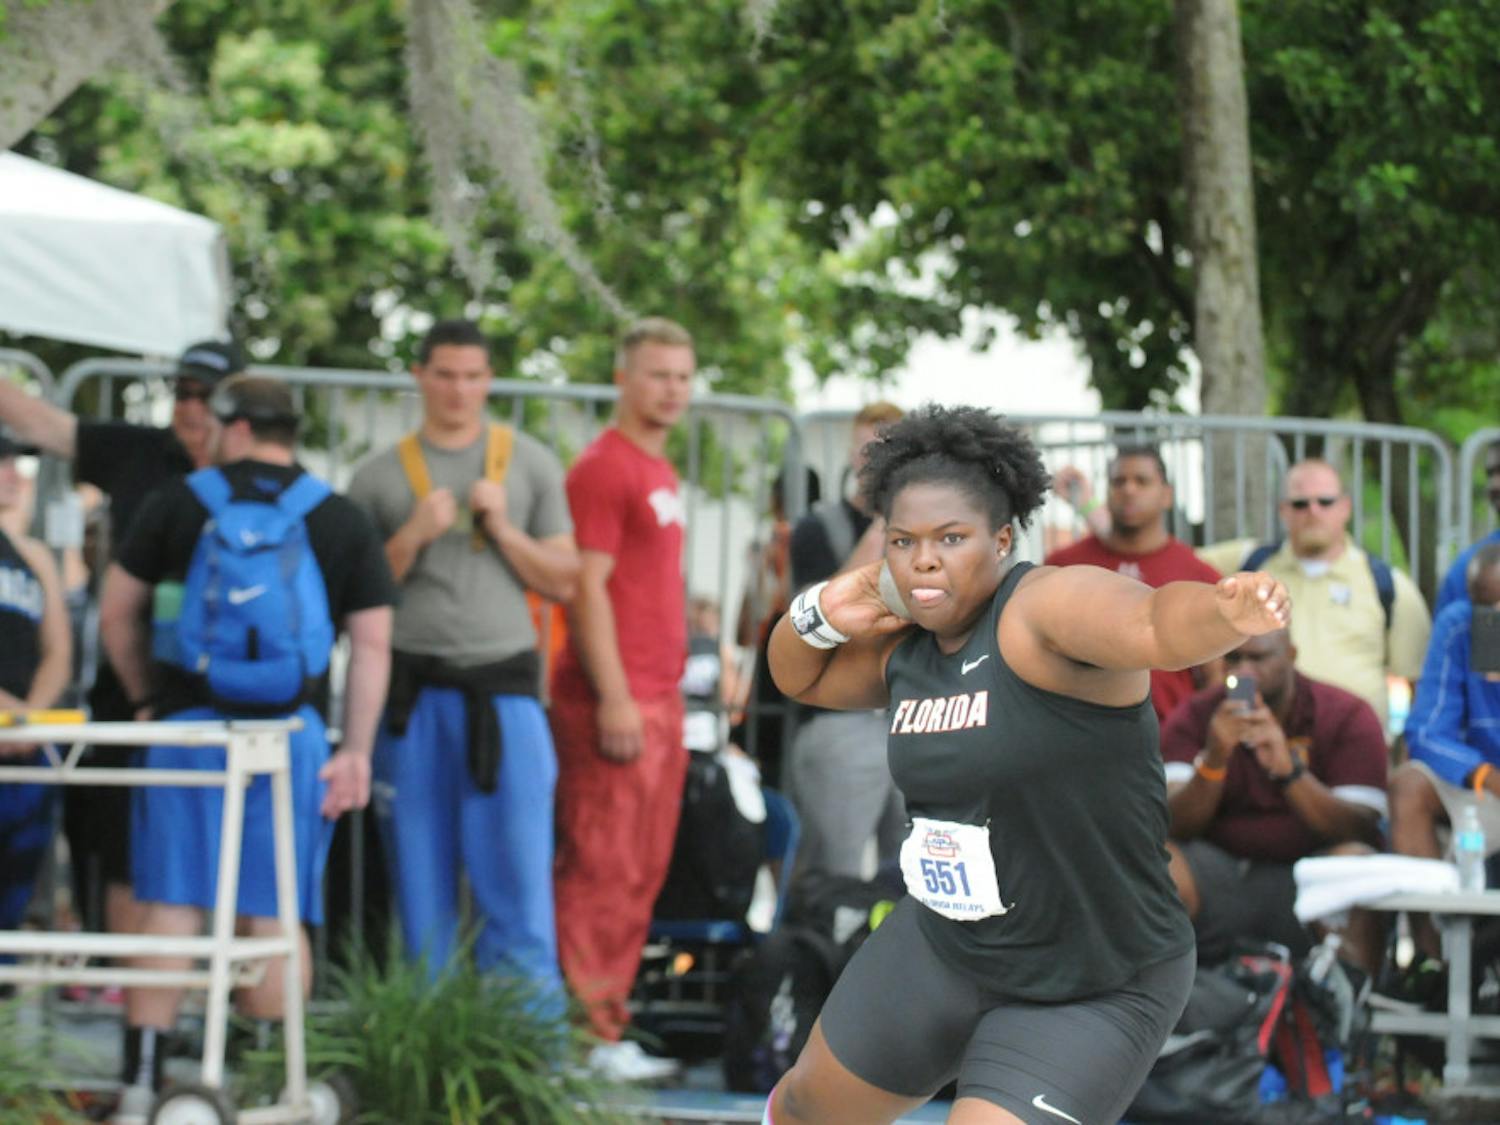 Senior thrower Lloydricia Cameron became the first Gator since 2004 to advance to the NCAA Outdoor Championships in both the shot put and discuss. 